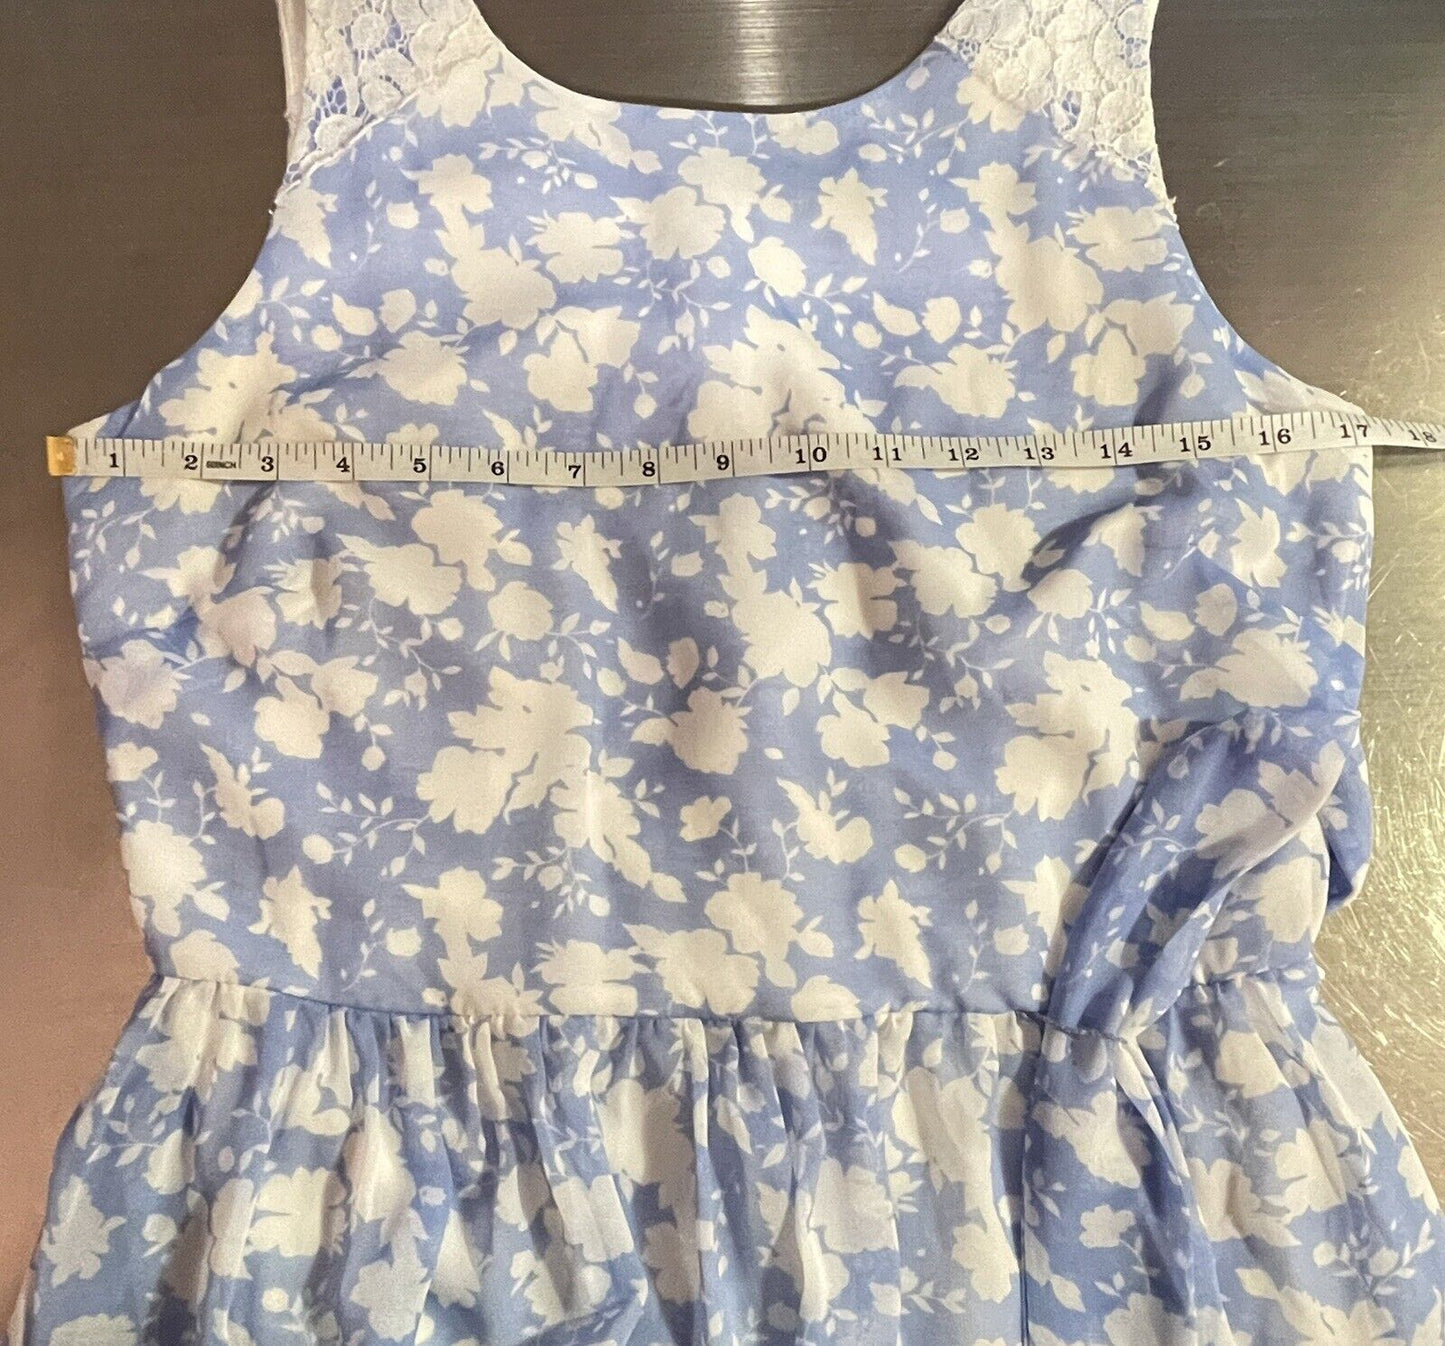 Disney Alice In Wonderland Dress Sz L Colleen Atwood Blue White Floral Lace